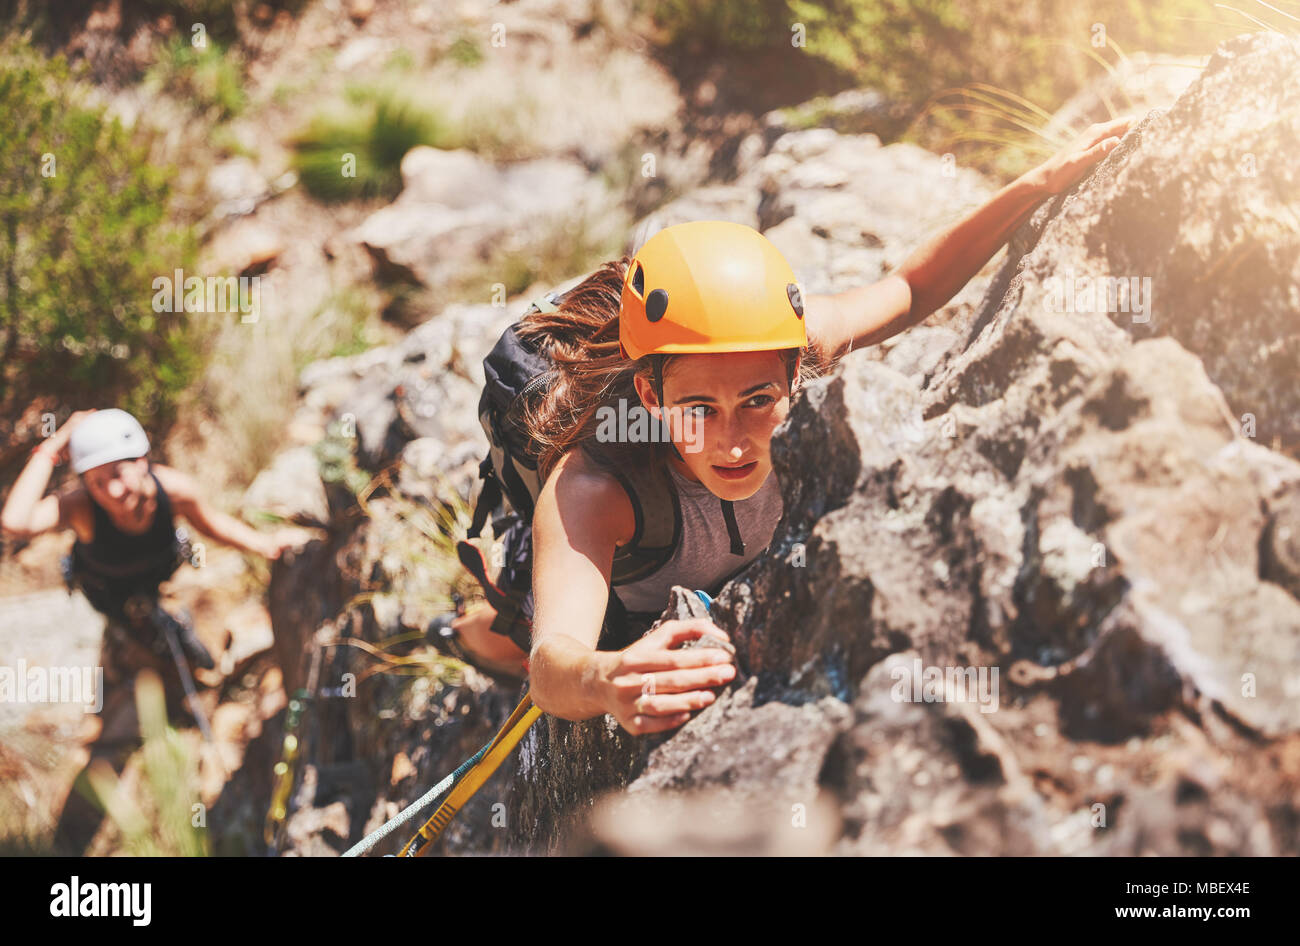 Focused, determined female rock climber hanging from rock Stock Photo